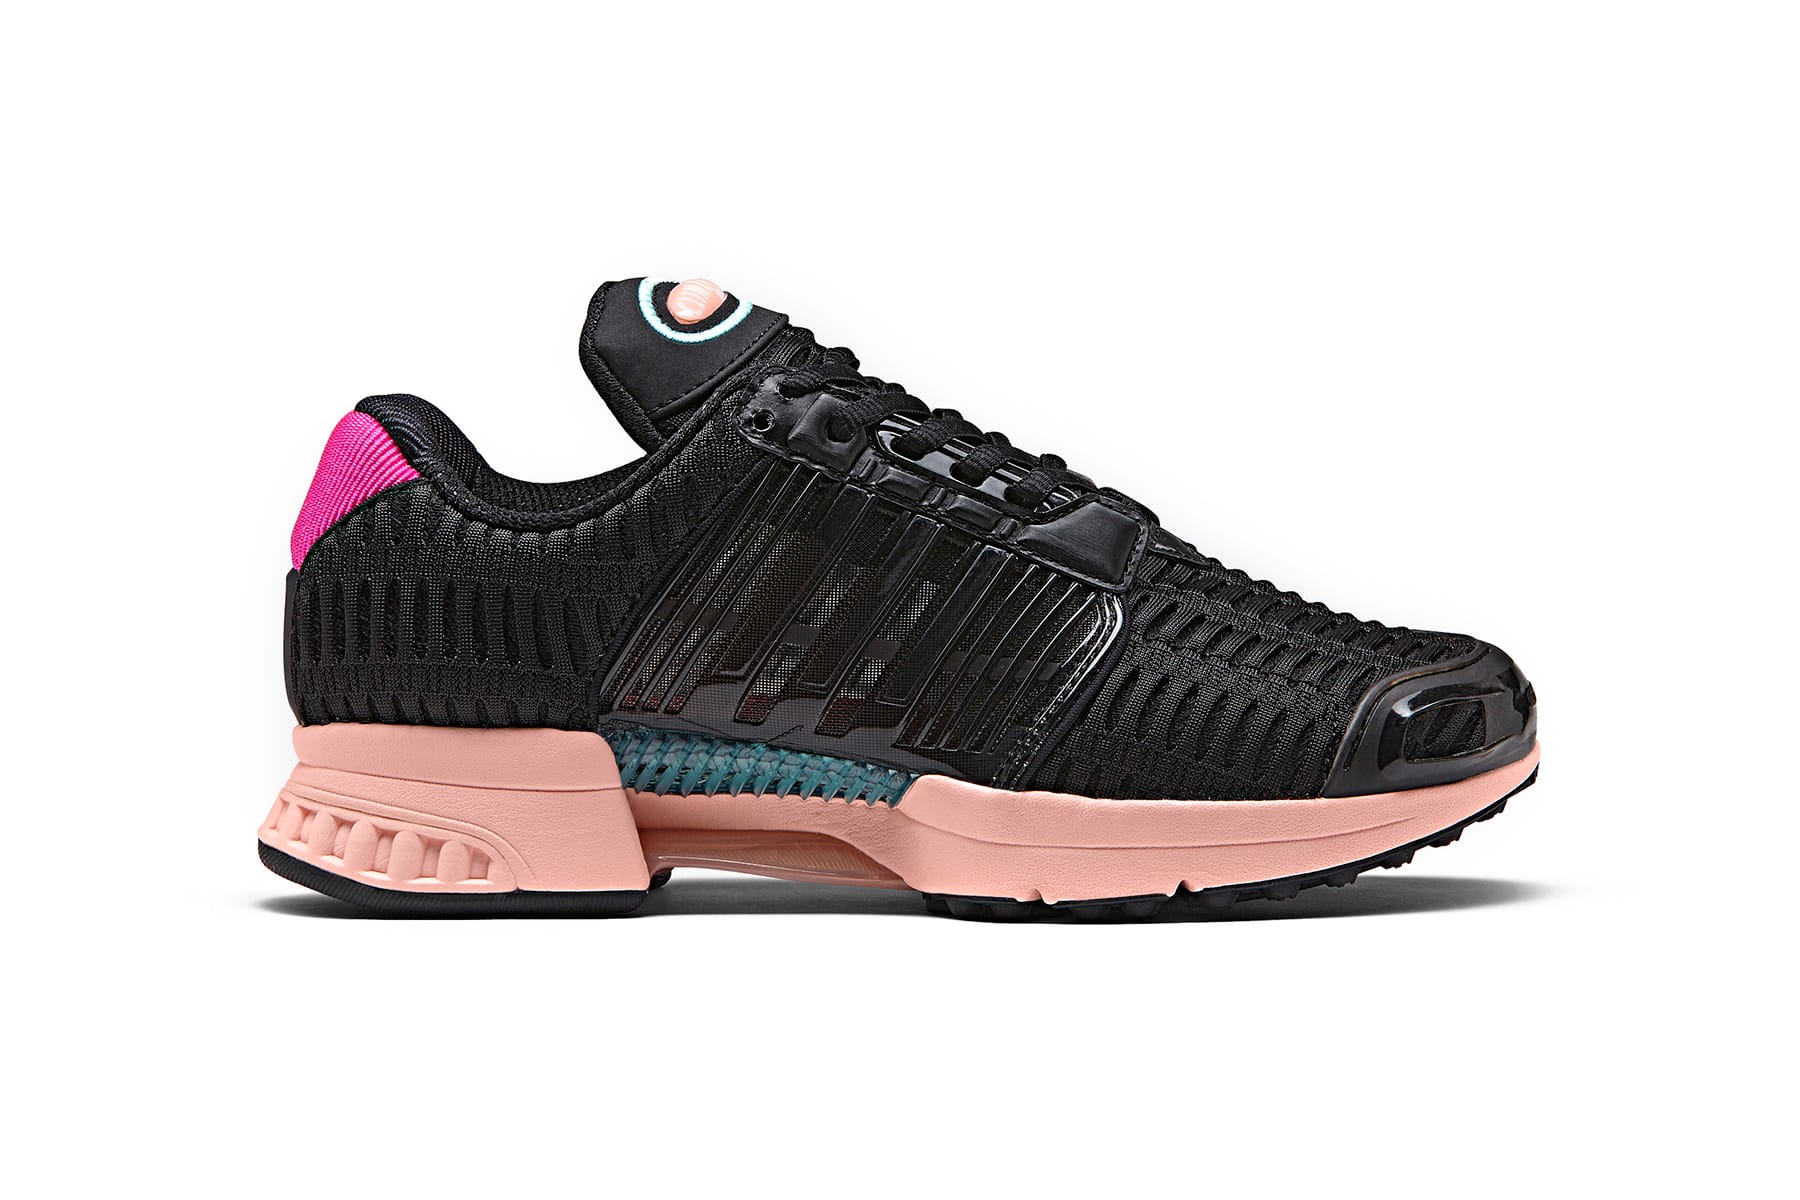 adidas climacool shoes womens pink